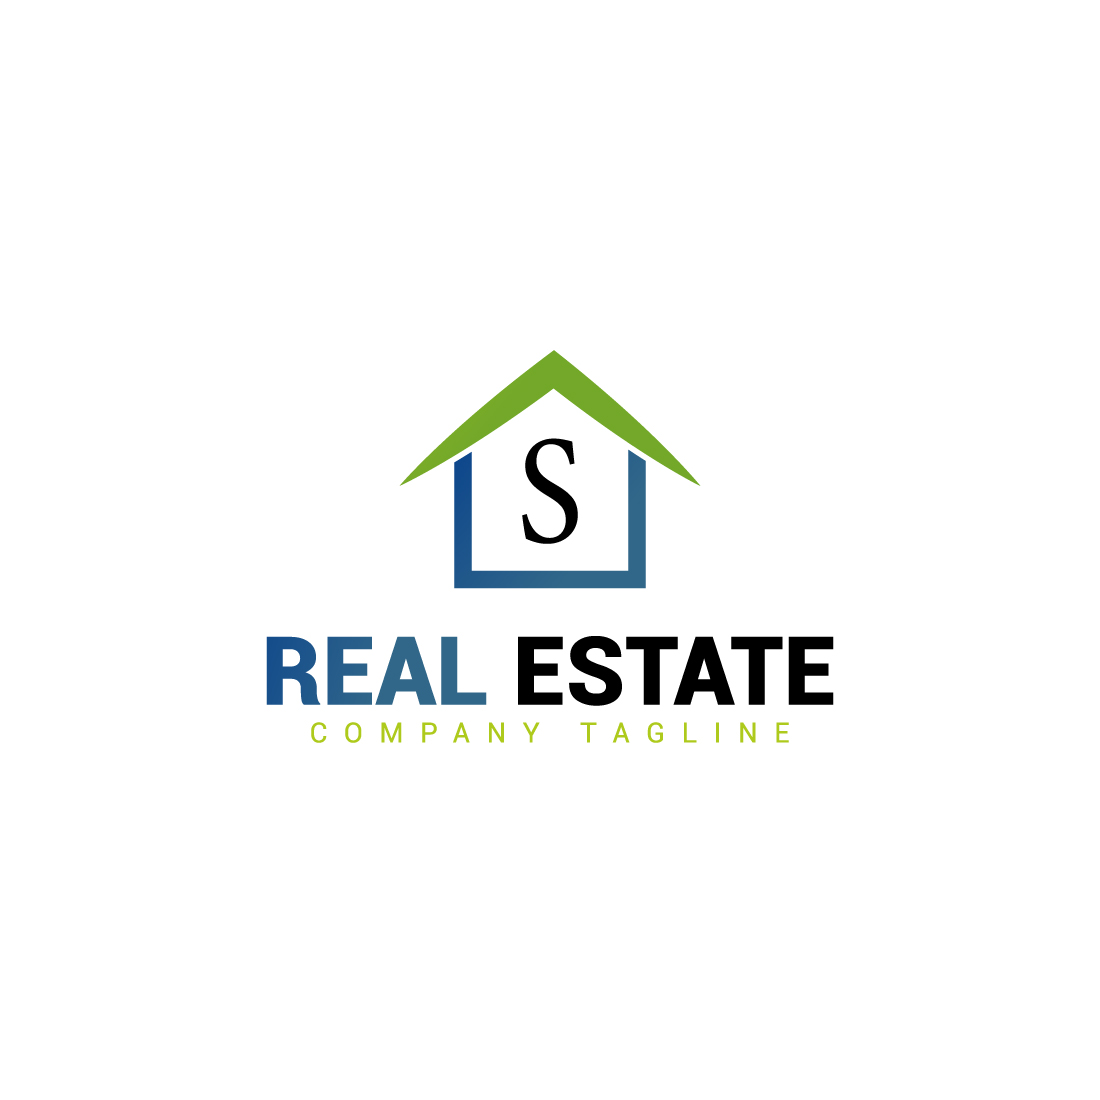 Real estate logo with green, dark blue color and S letter cover image.